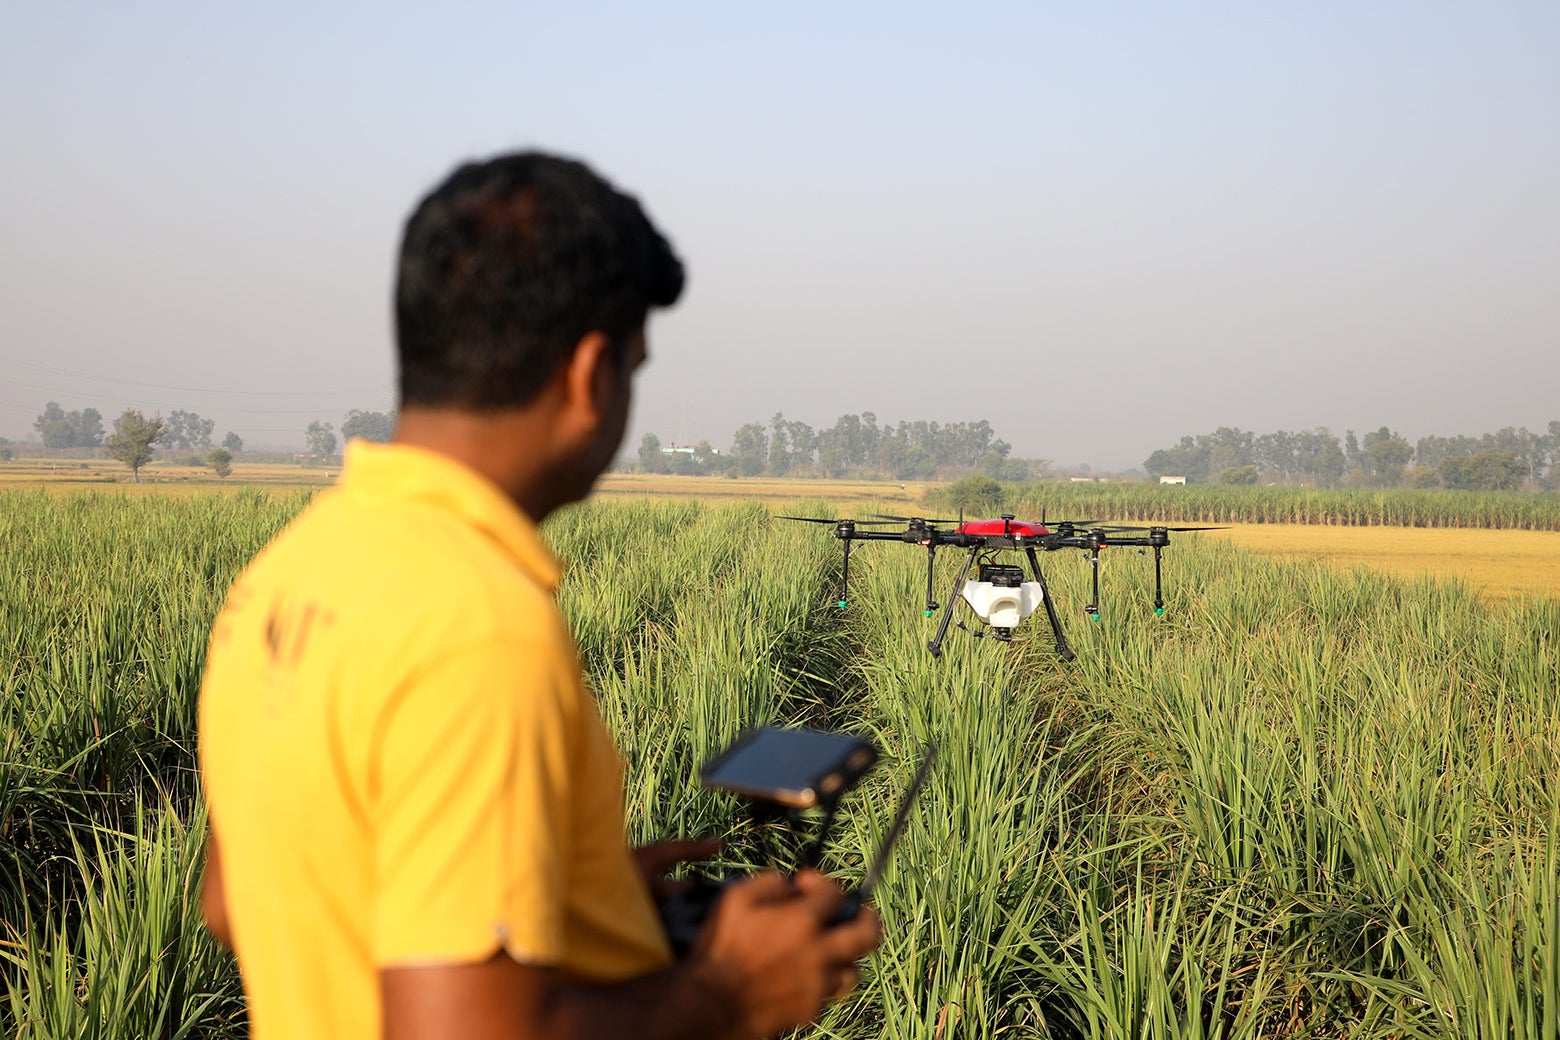 Indian Farm Workers Are Being Replaced by Drones. They Fear a Much Darker Future. Arbab Ali and Nadeem Sarwar